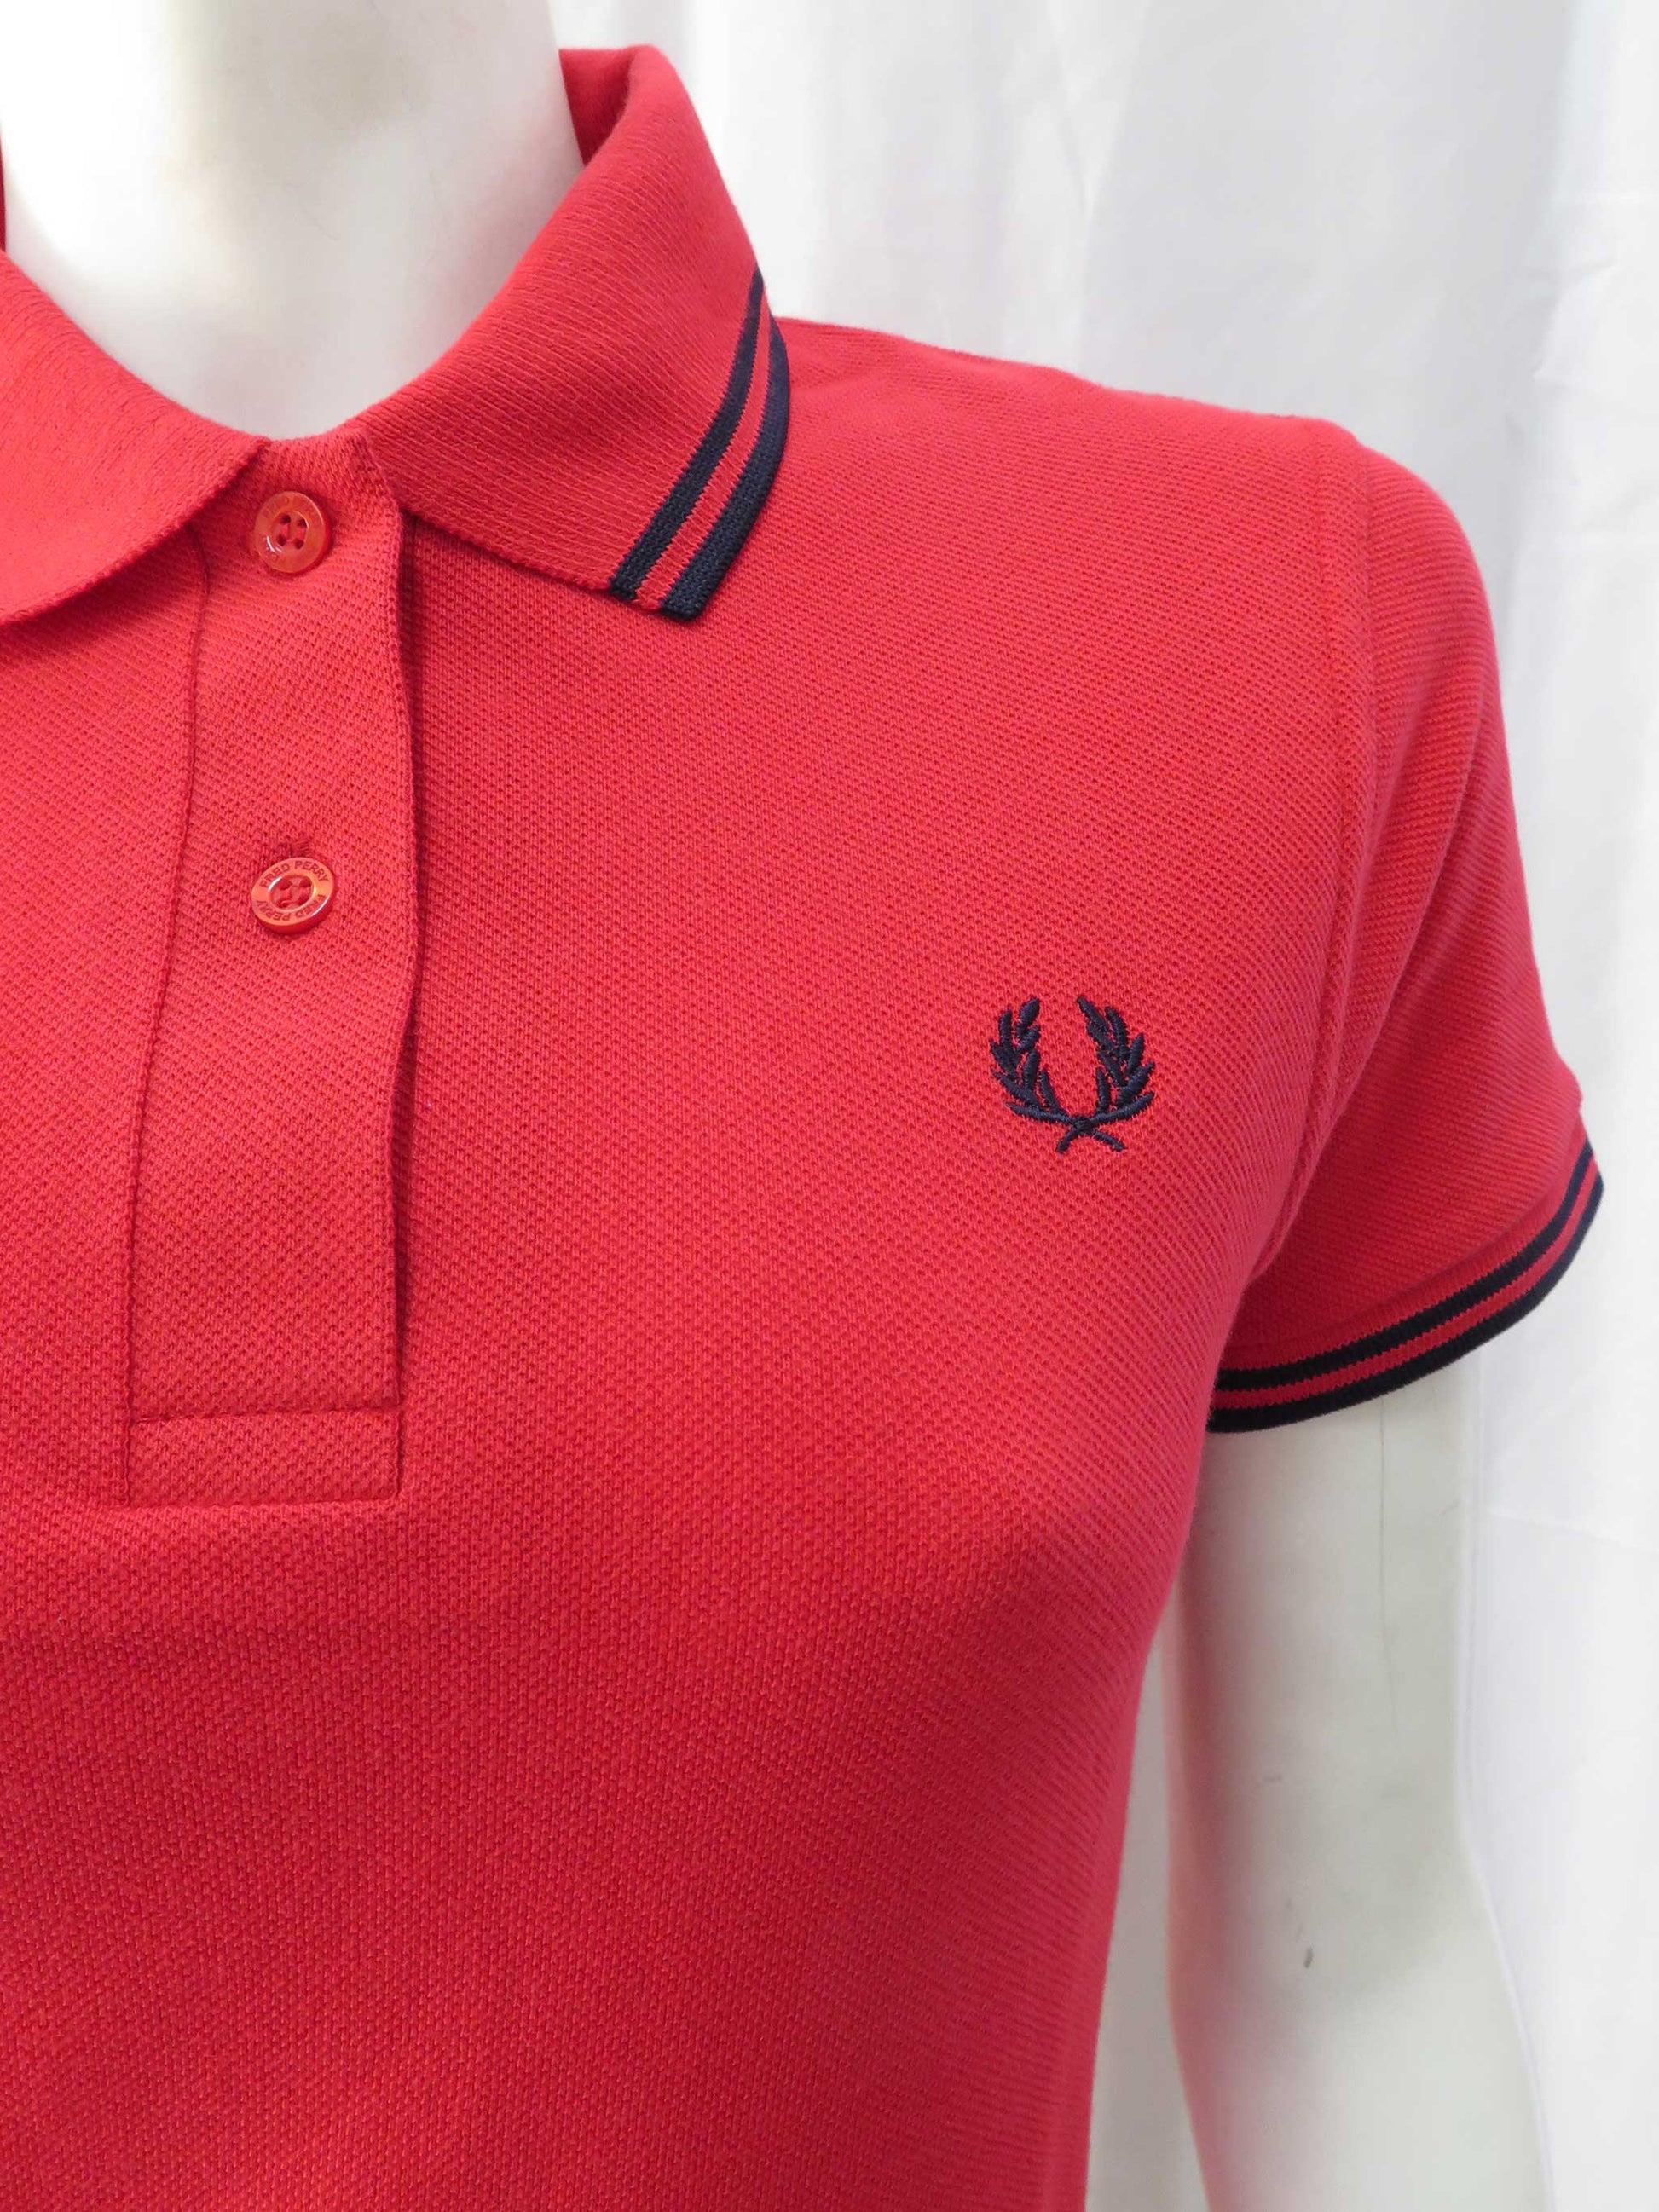 LADIES MADE IN ENGLAND FRED PERRY SHIRT (RED/BLACK)